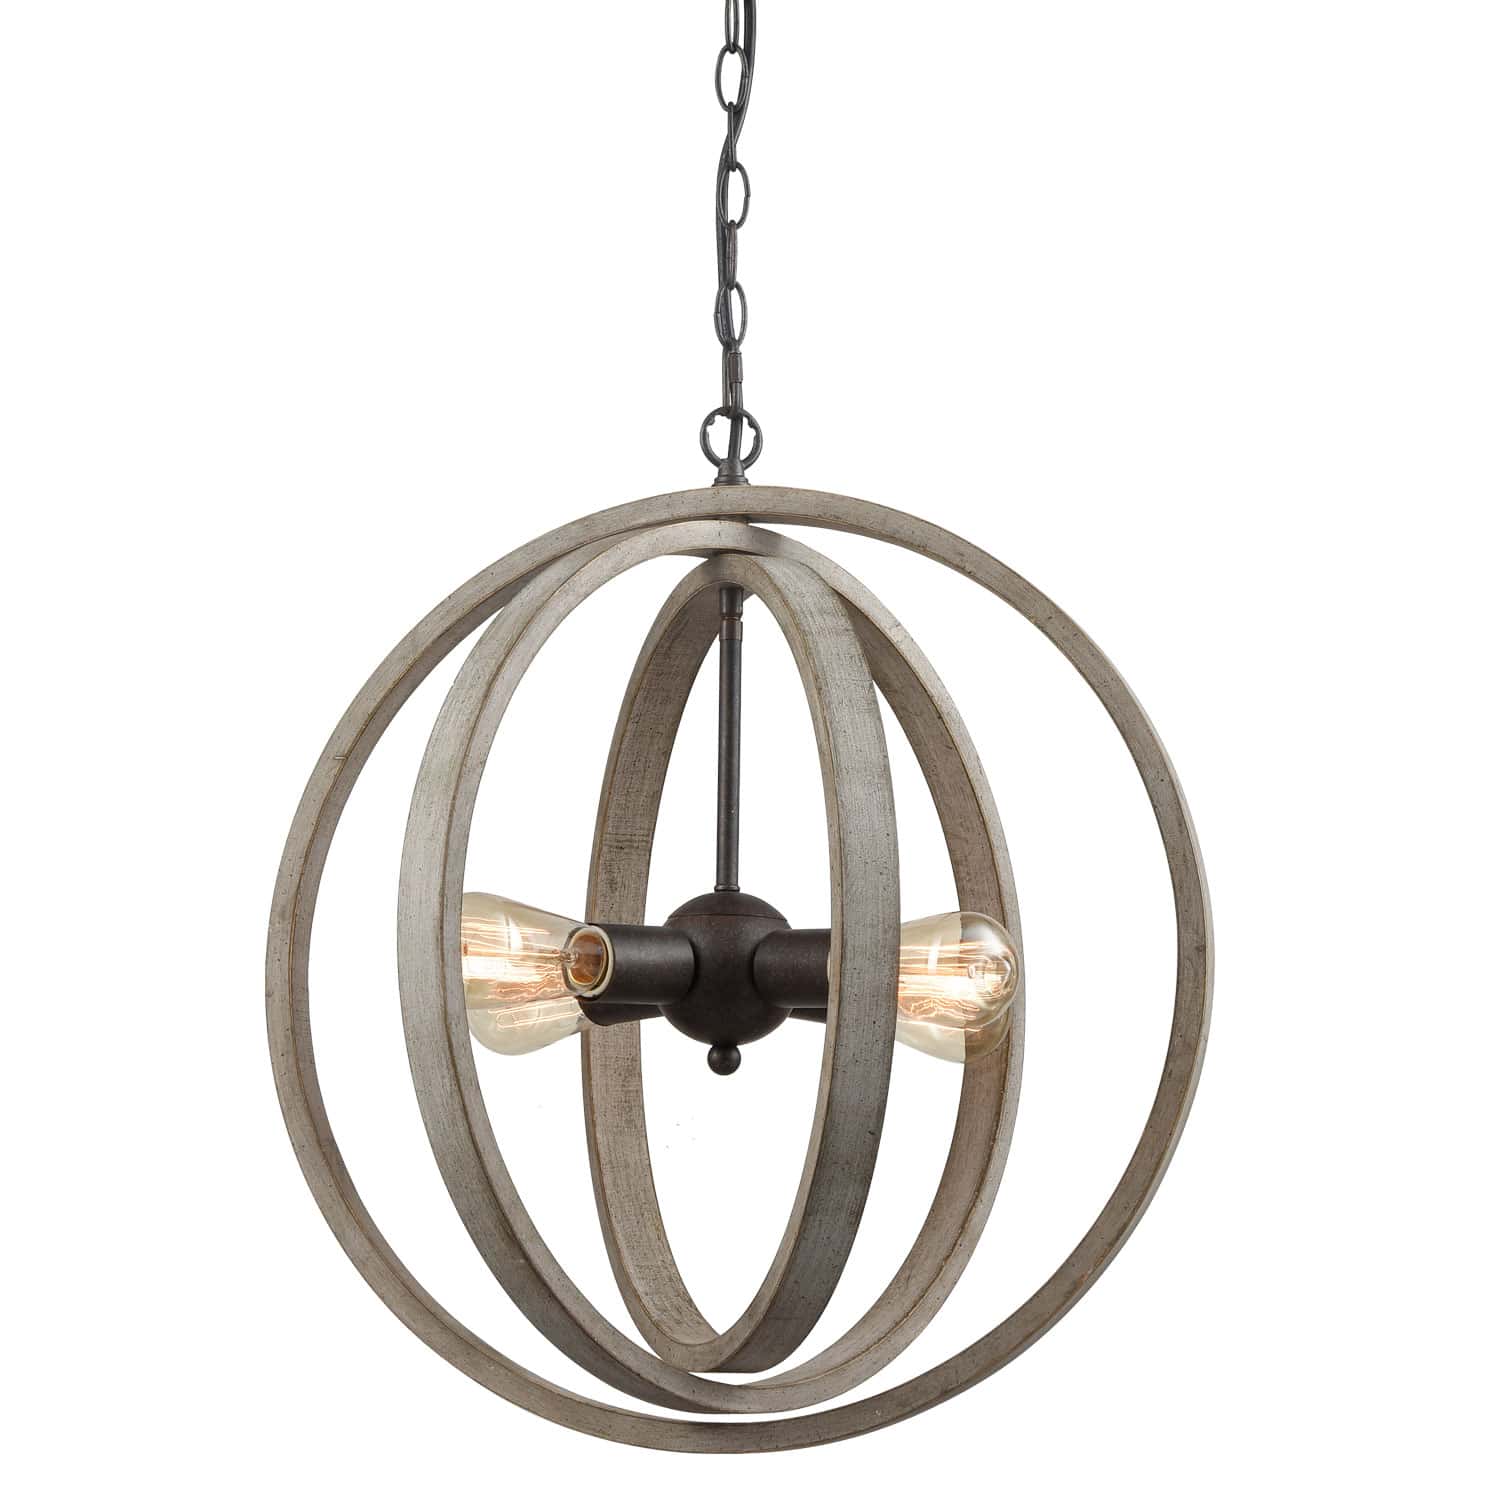 Rustic Pendant Chandelier with Globe Wood Shade - 4 Light